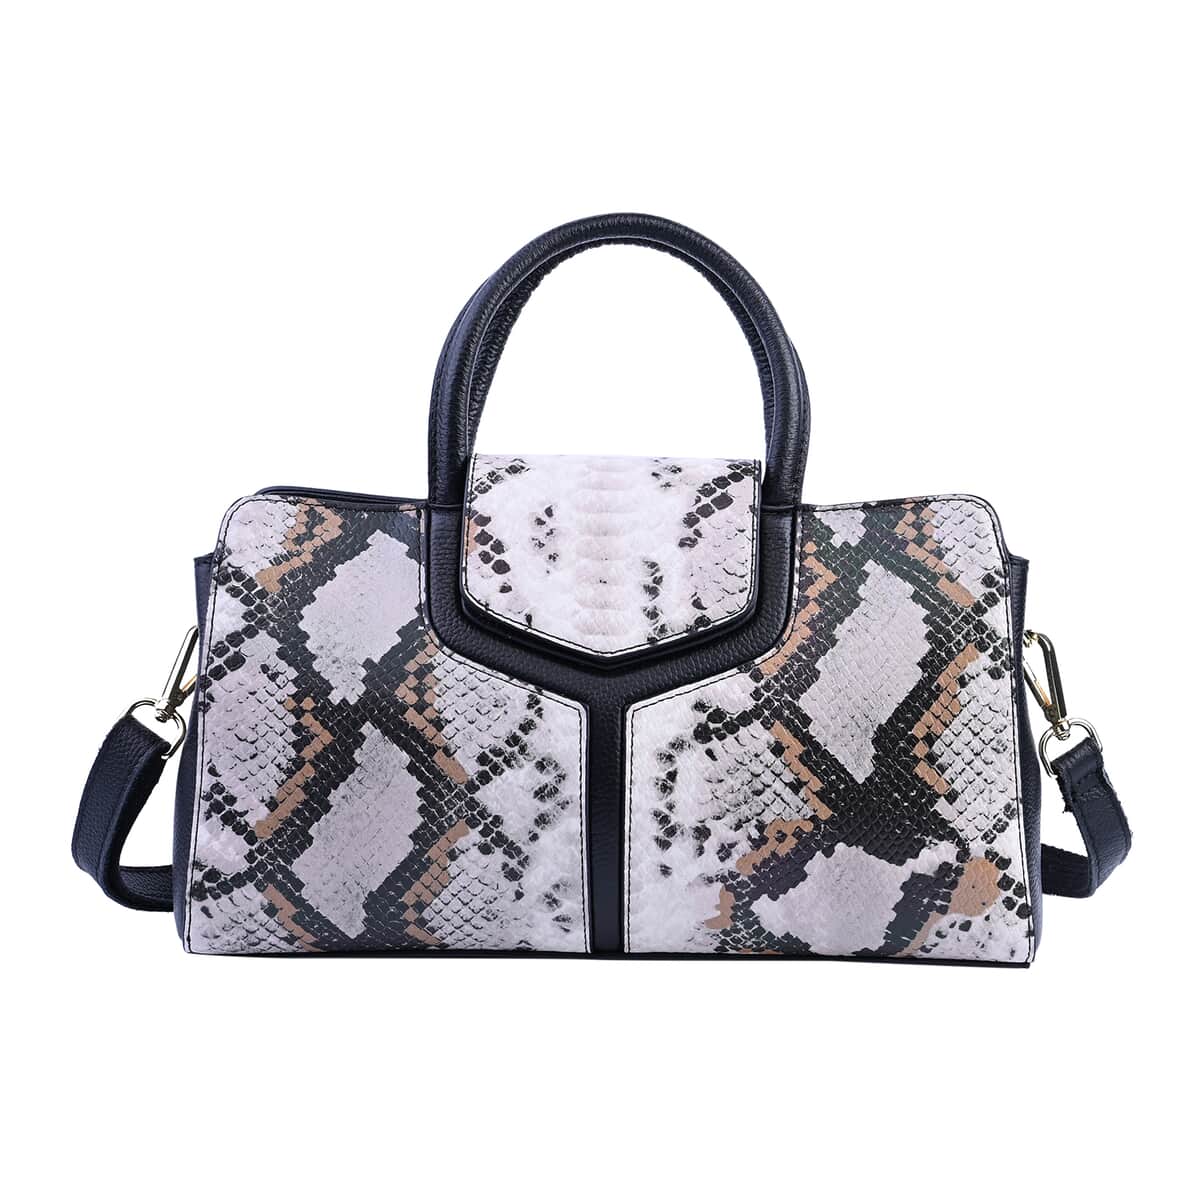 Hong Kong Closeout Collection Black and White Snakeskin Print Genuine Leather Convertible Tote Bag with Flap Lock & Zip Closure image number 0